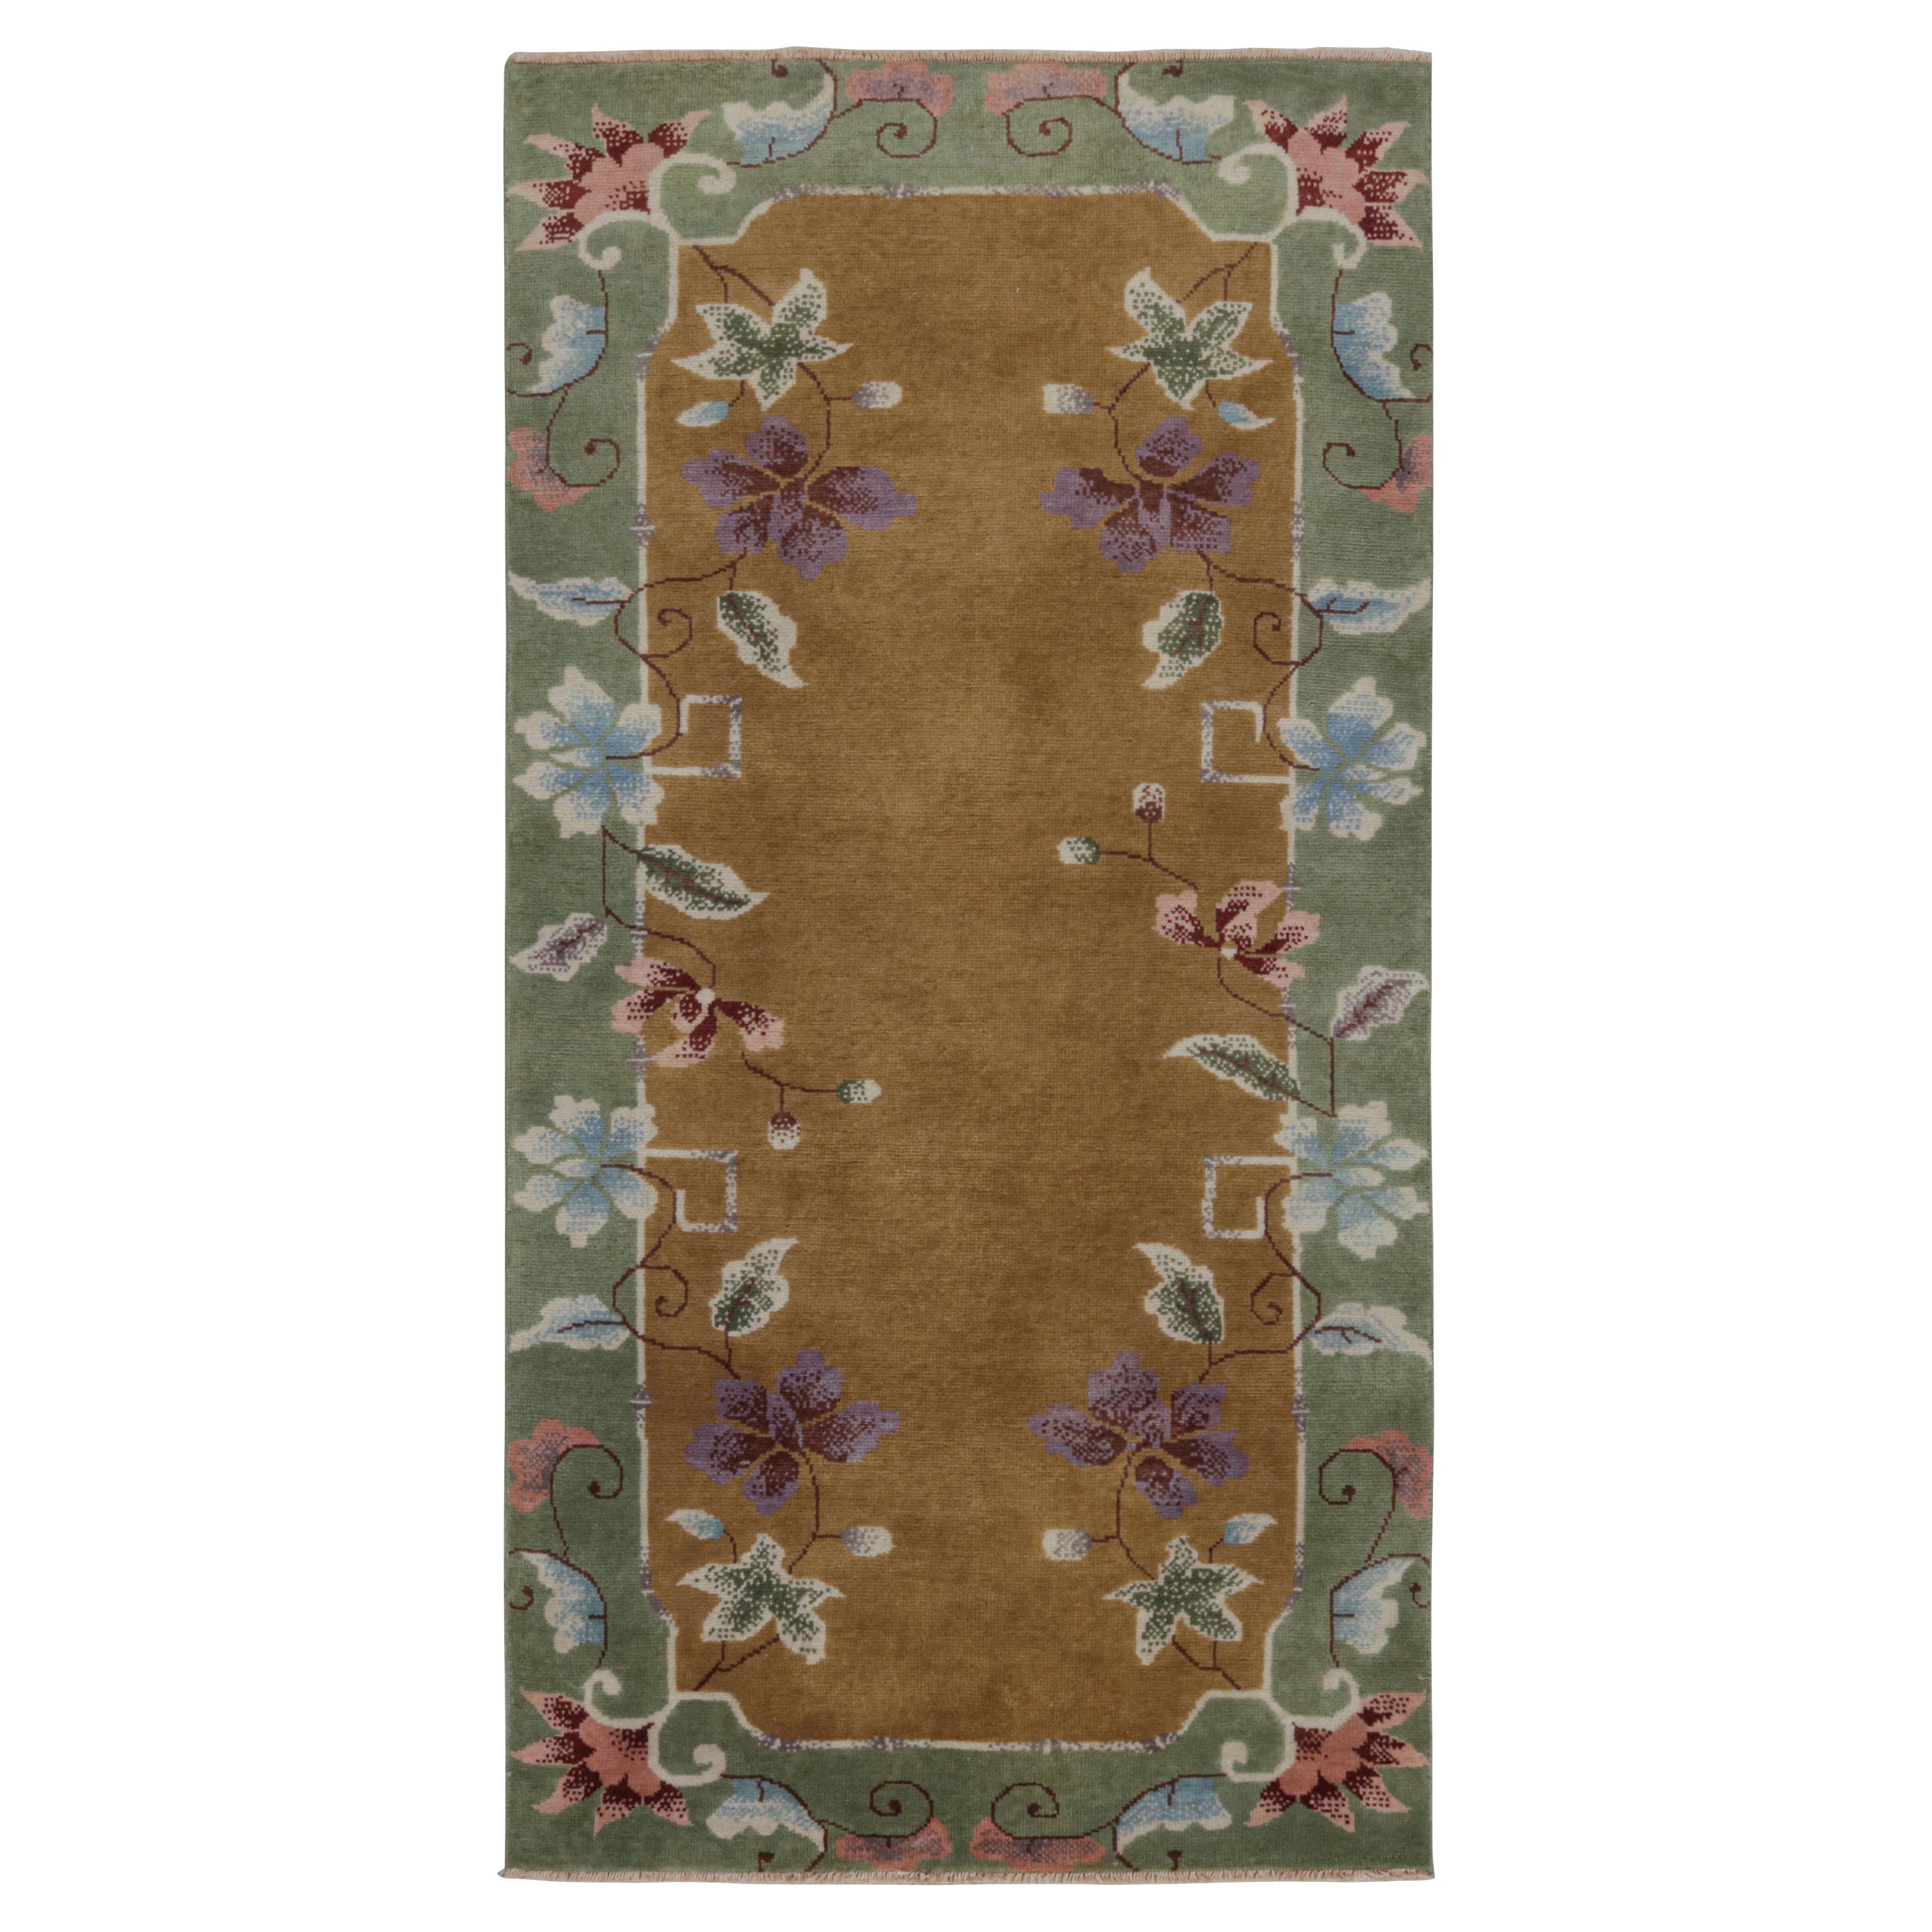 Rug & Kilim's Chinese Art Deco Style Rug in Gold with Floral Pattern (tapis chinois de style art déco avec motif floral)